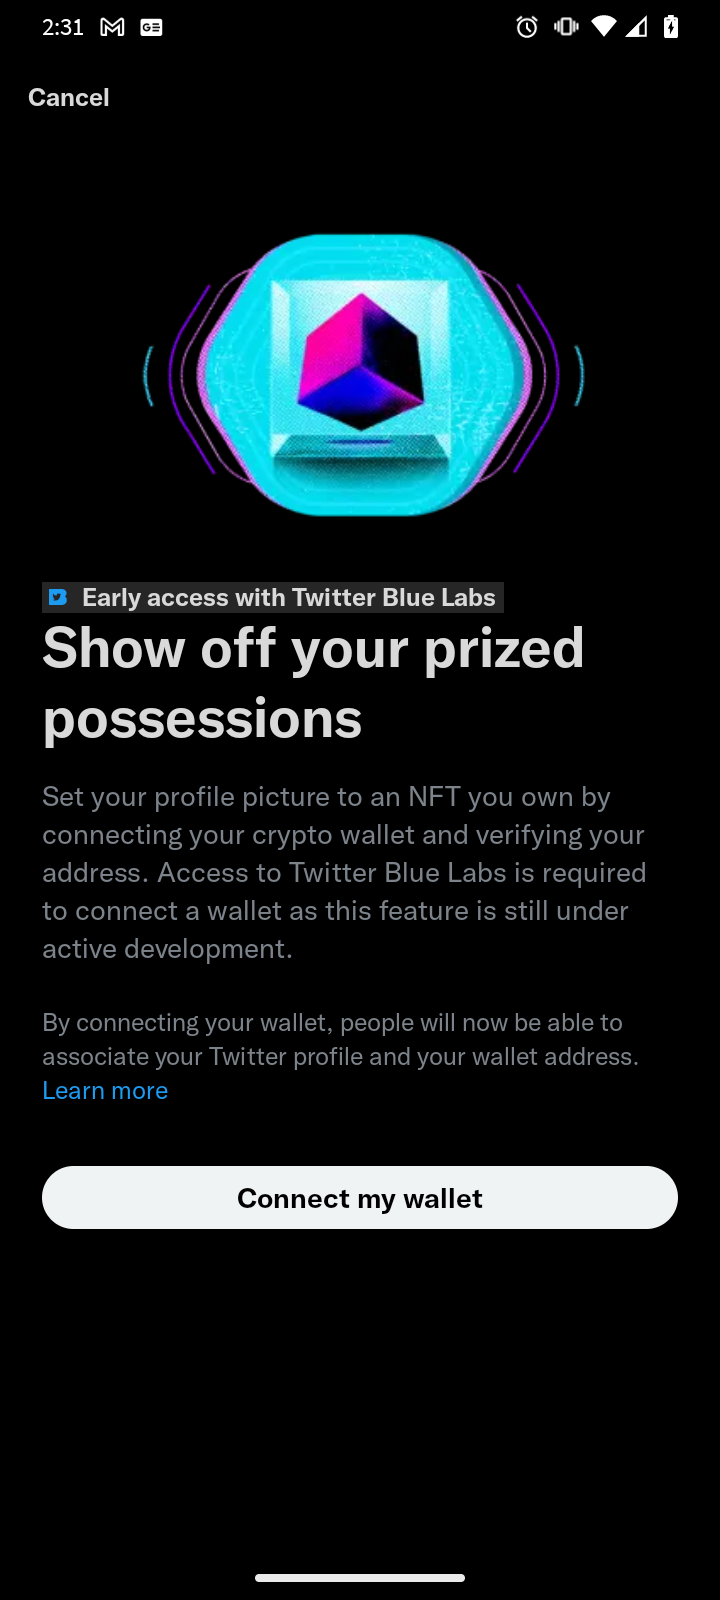 About NFT profile pictures on Twitter Blue